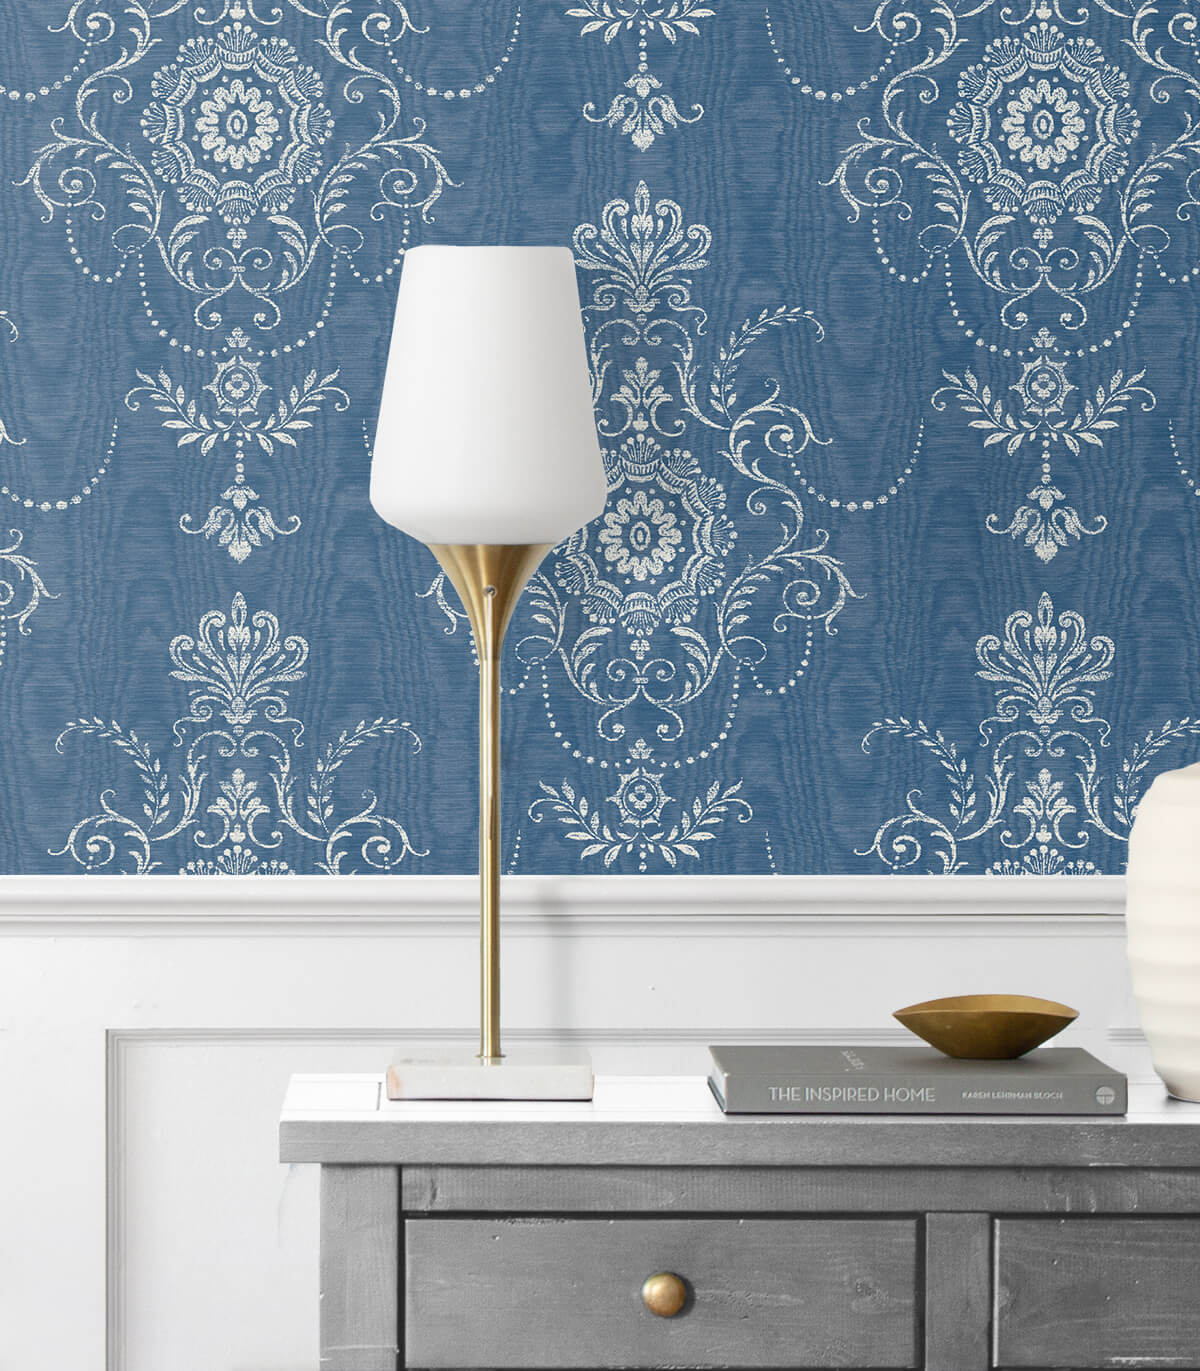 Seabrook French Country Colette Cameo Wallpaper - French Blue